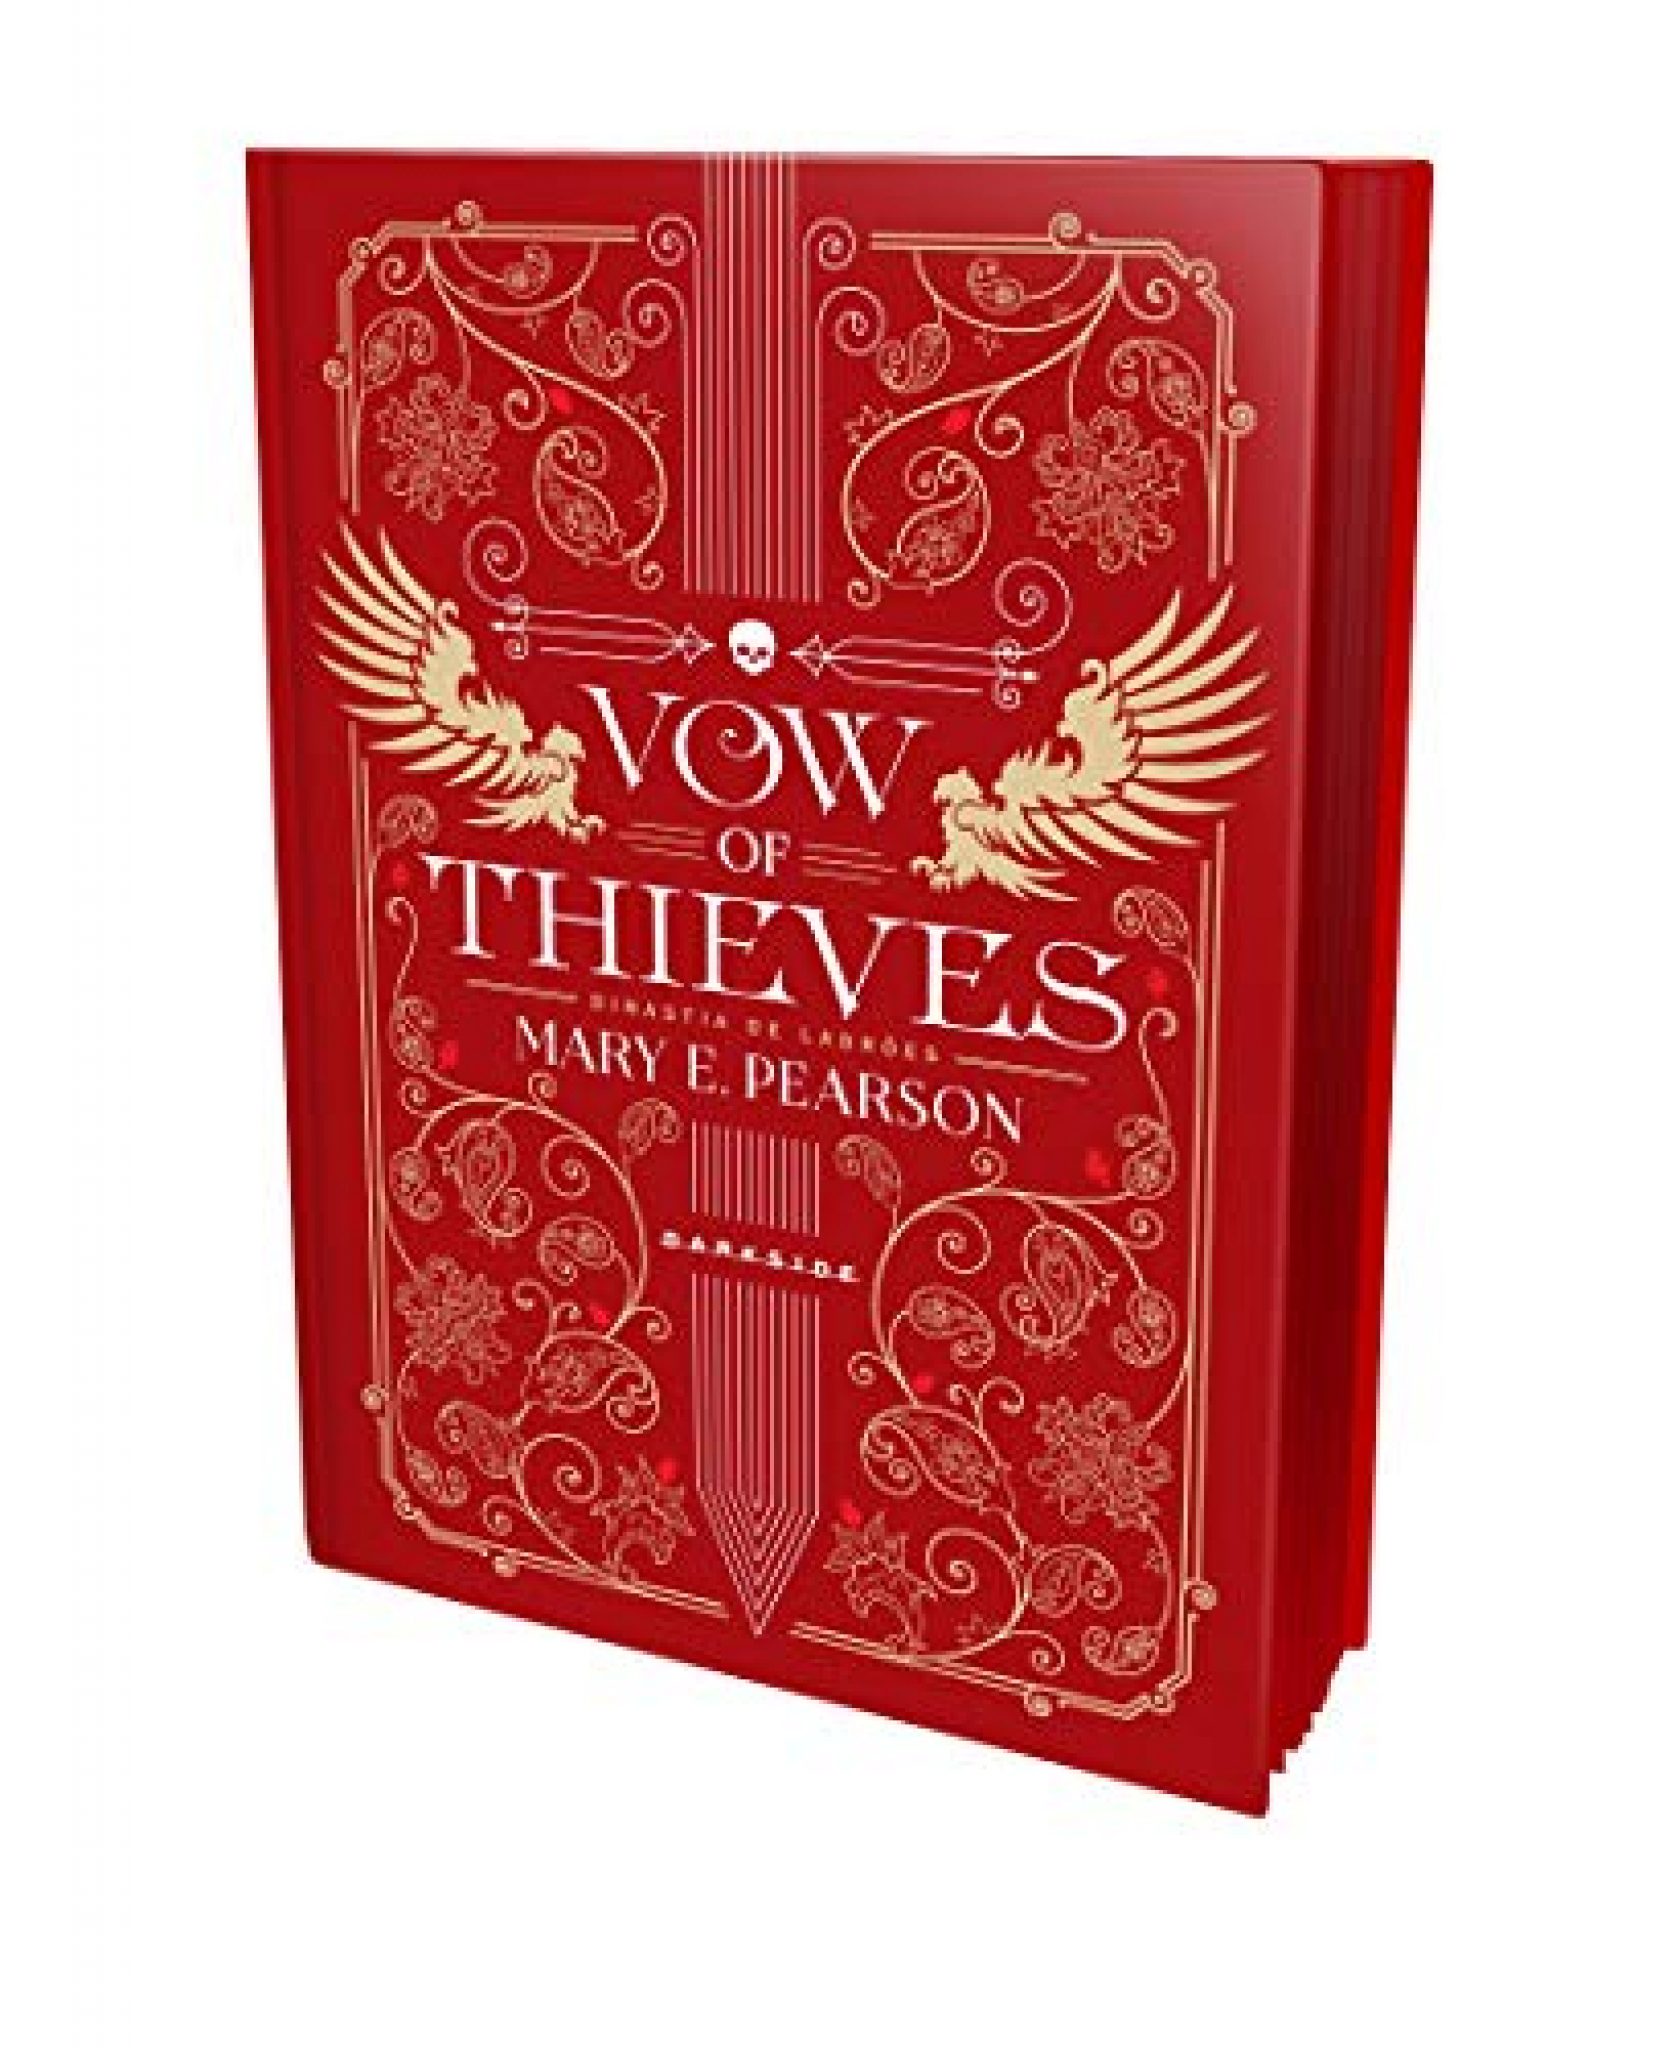 the vow of thieves